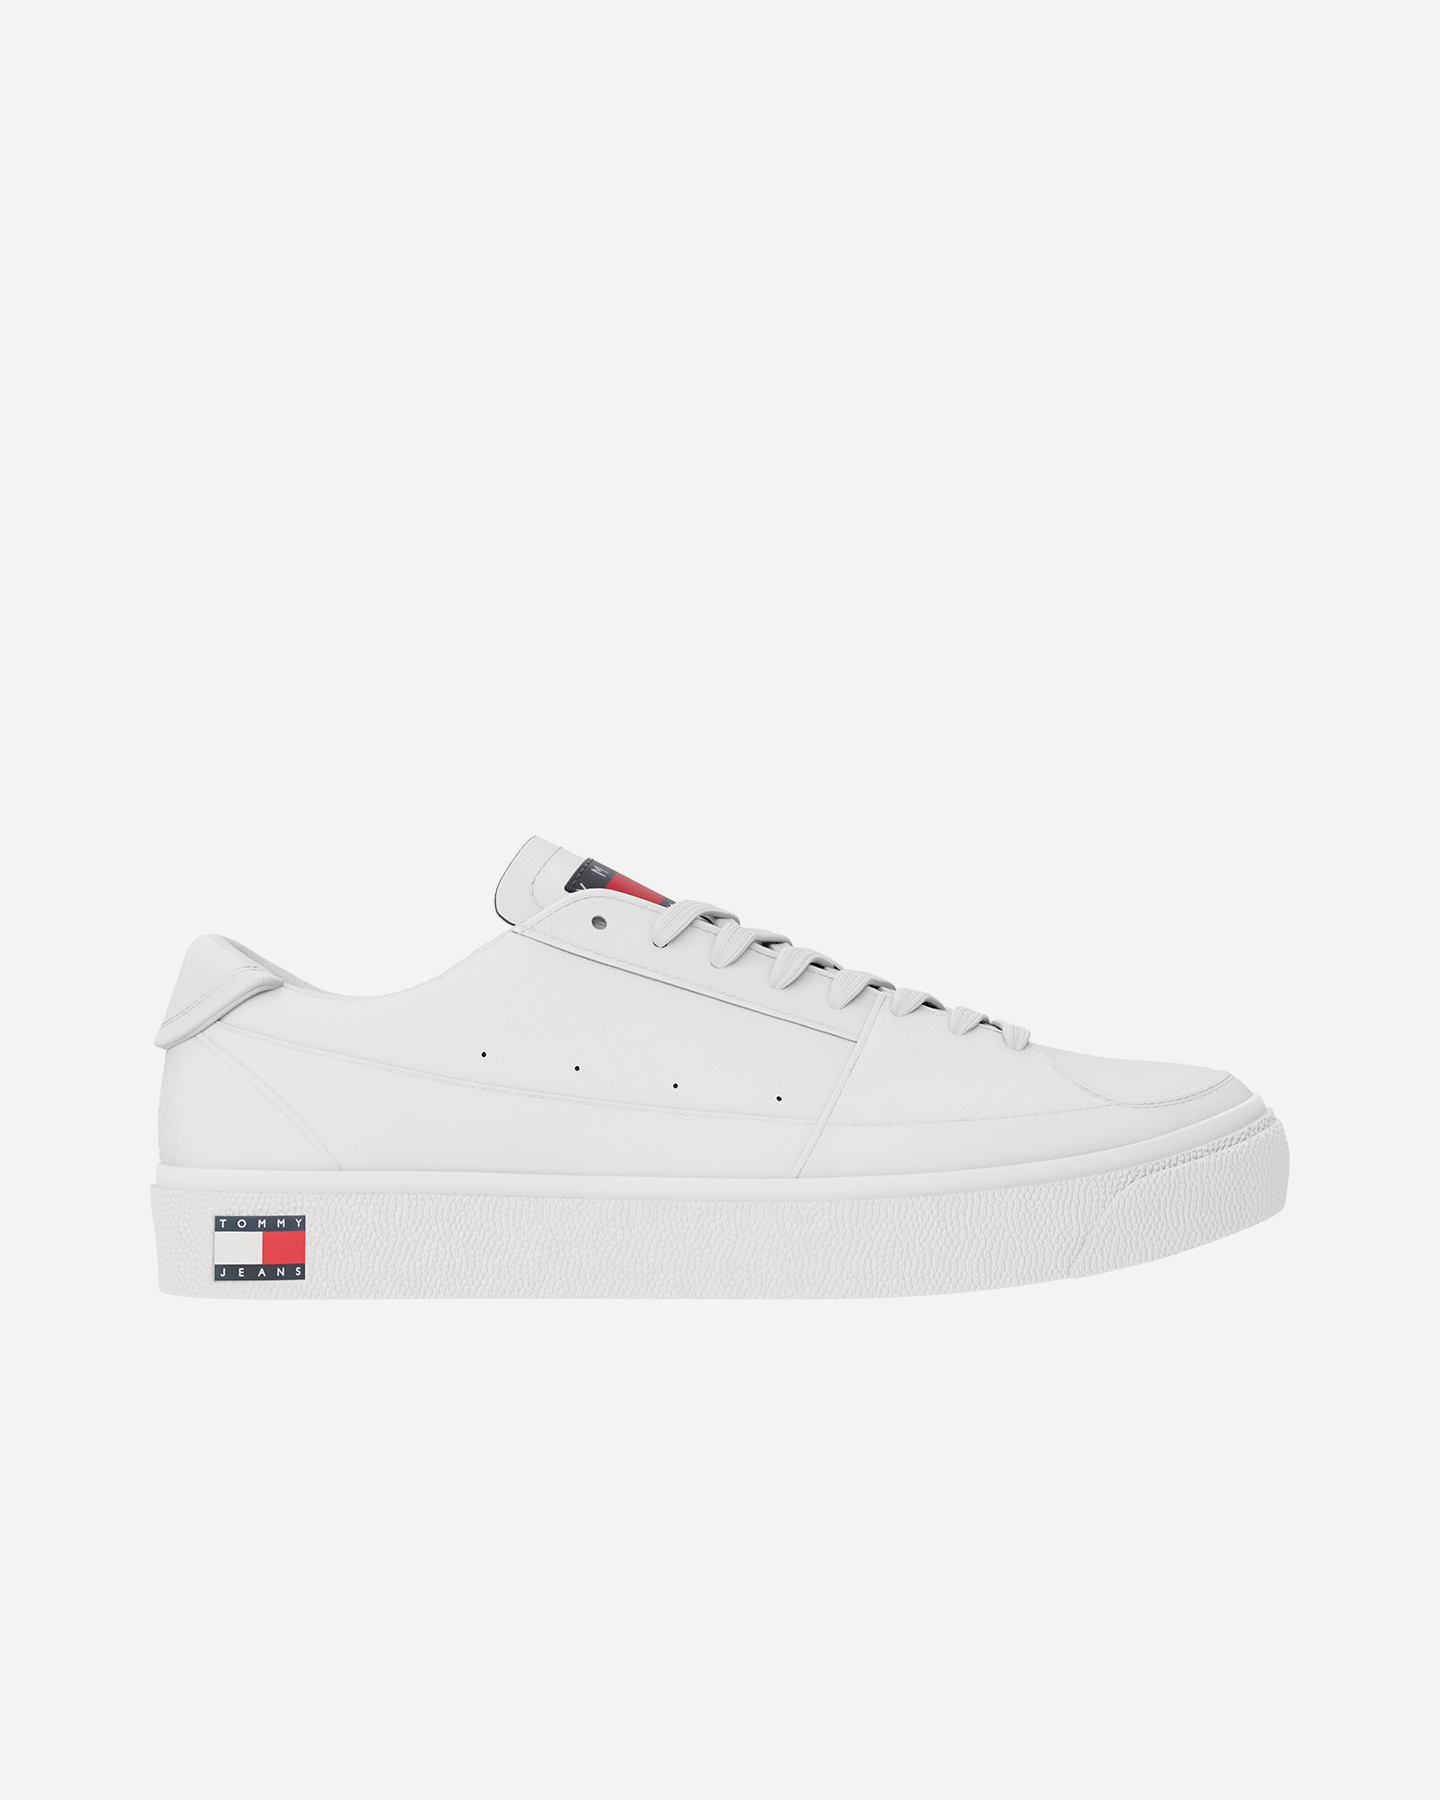 Image of Tommy Hilfiger Vulcanized Essential M - Scarpe Sneakers - Uomo